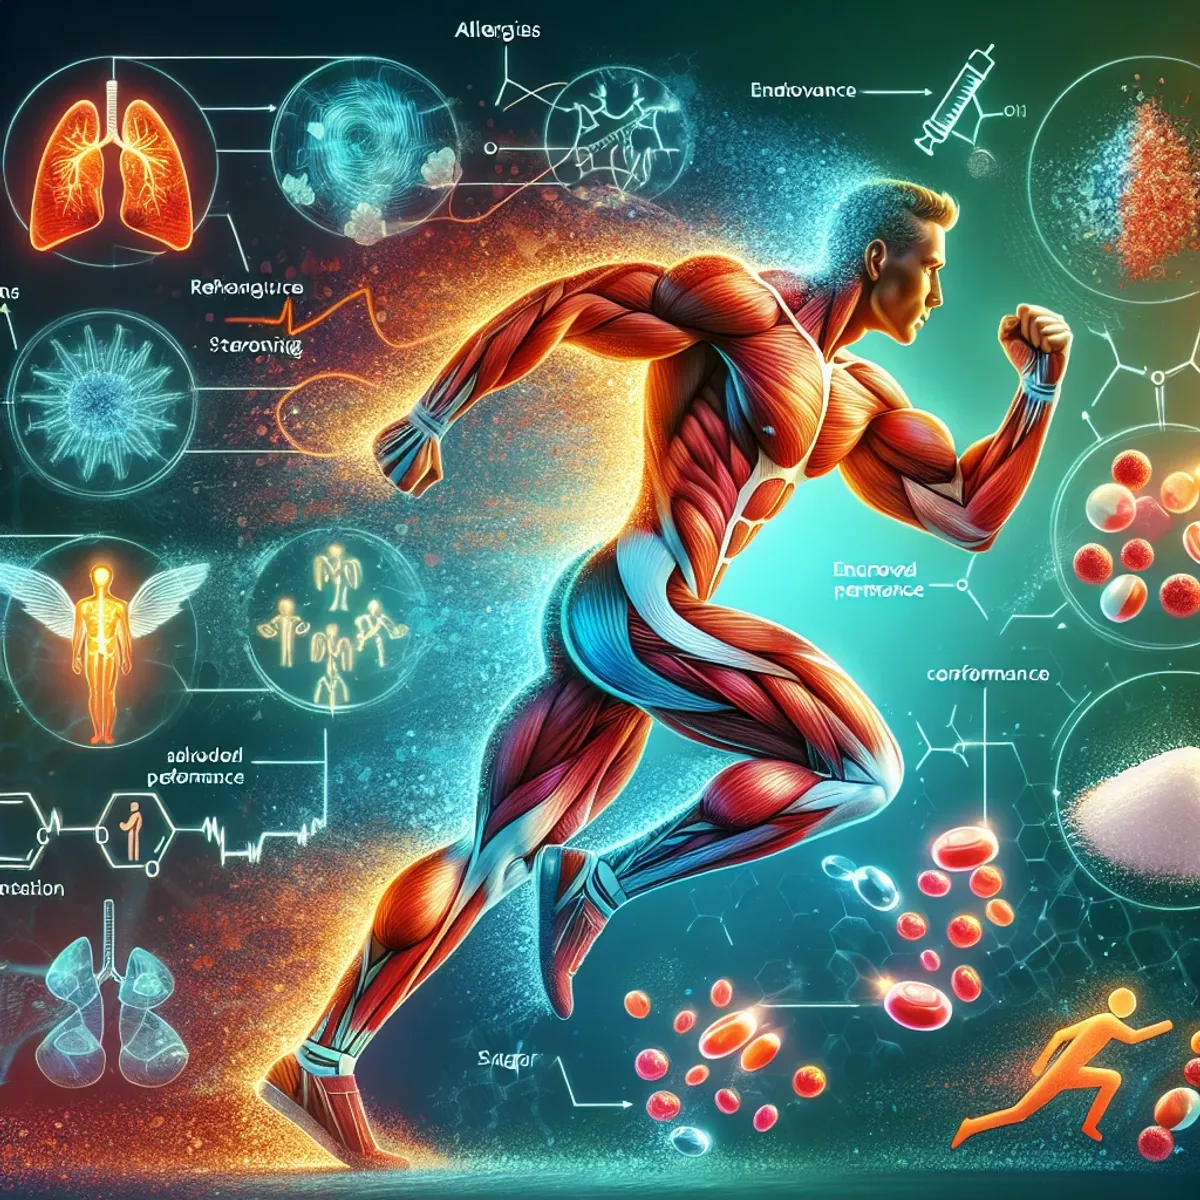 A concept art illustrating the benefits of Human Growth Hormone, including enhanced muscle mass and athletic performance, professional consultation, and potential impacts on allergies and blood sugar.